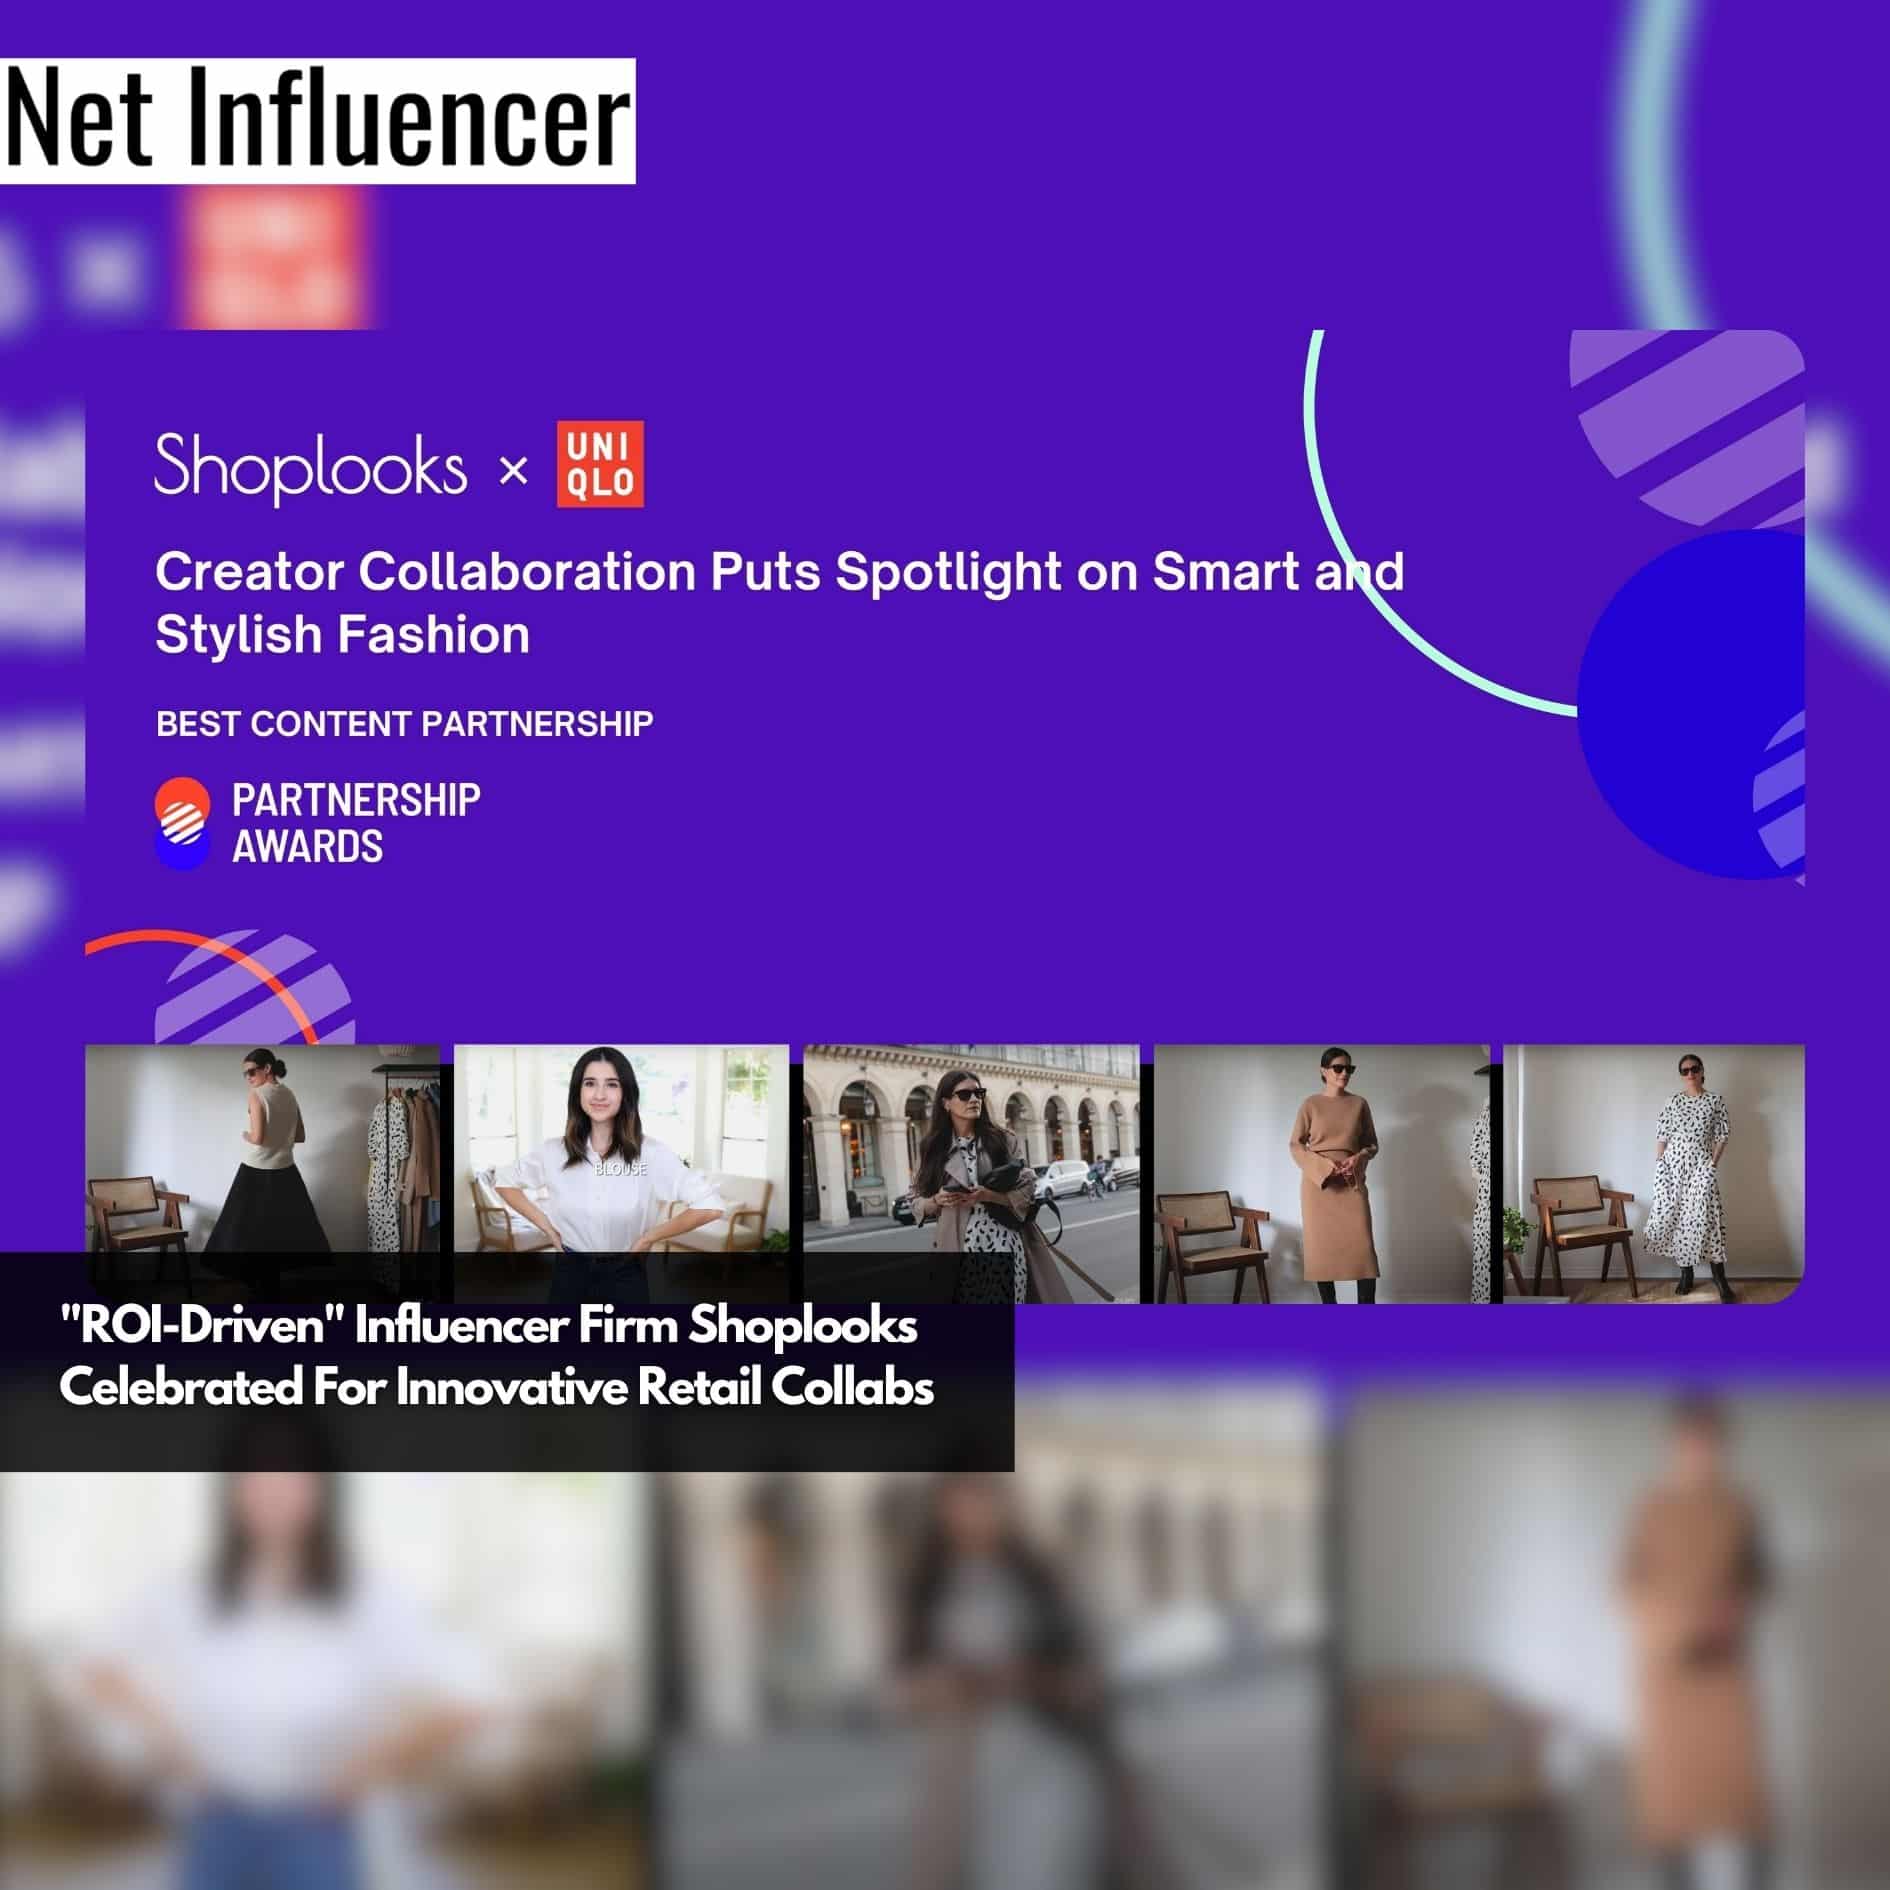 ROI-Driven Influencer Firm Shoplooks Celebrated For Innovative Retail Collabs